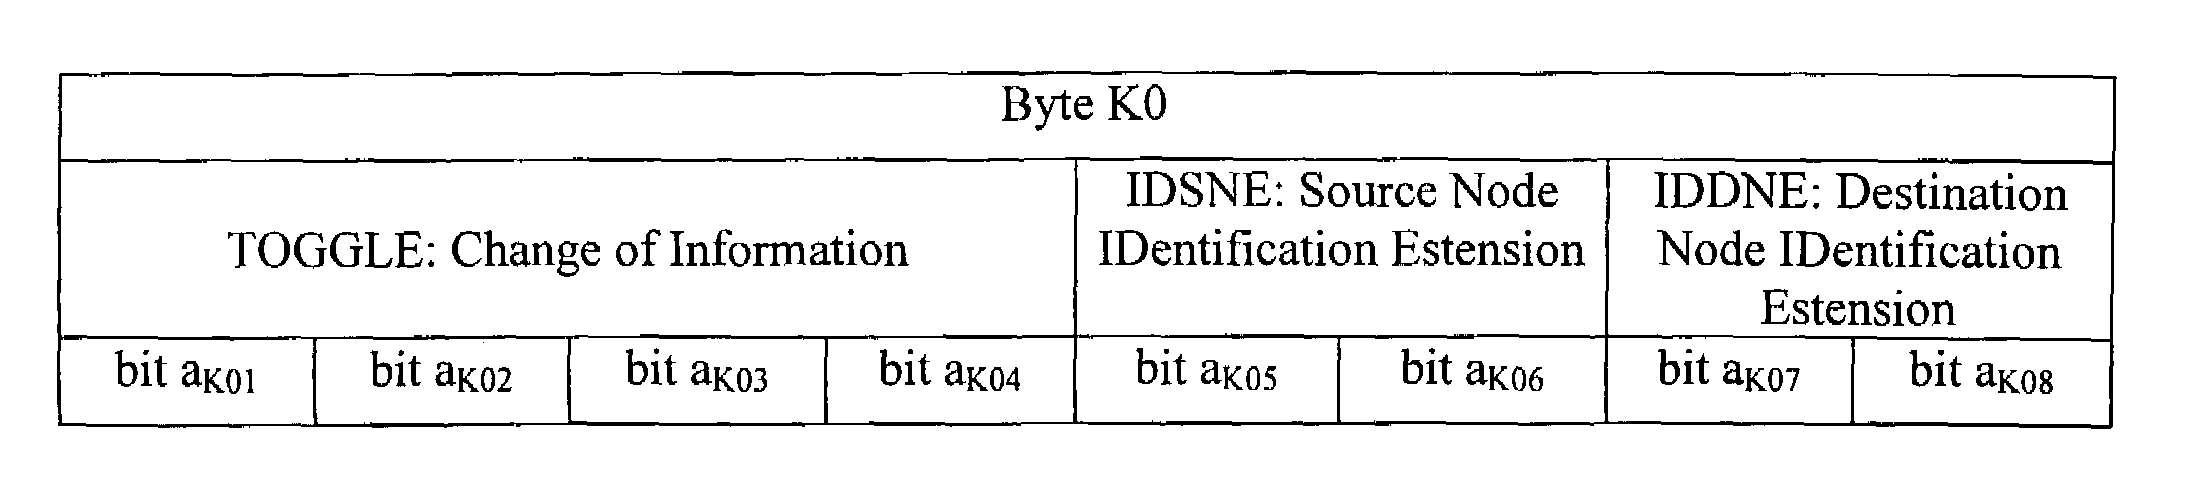 Time management of information distributed on K-bytes in SDH frames